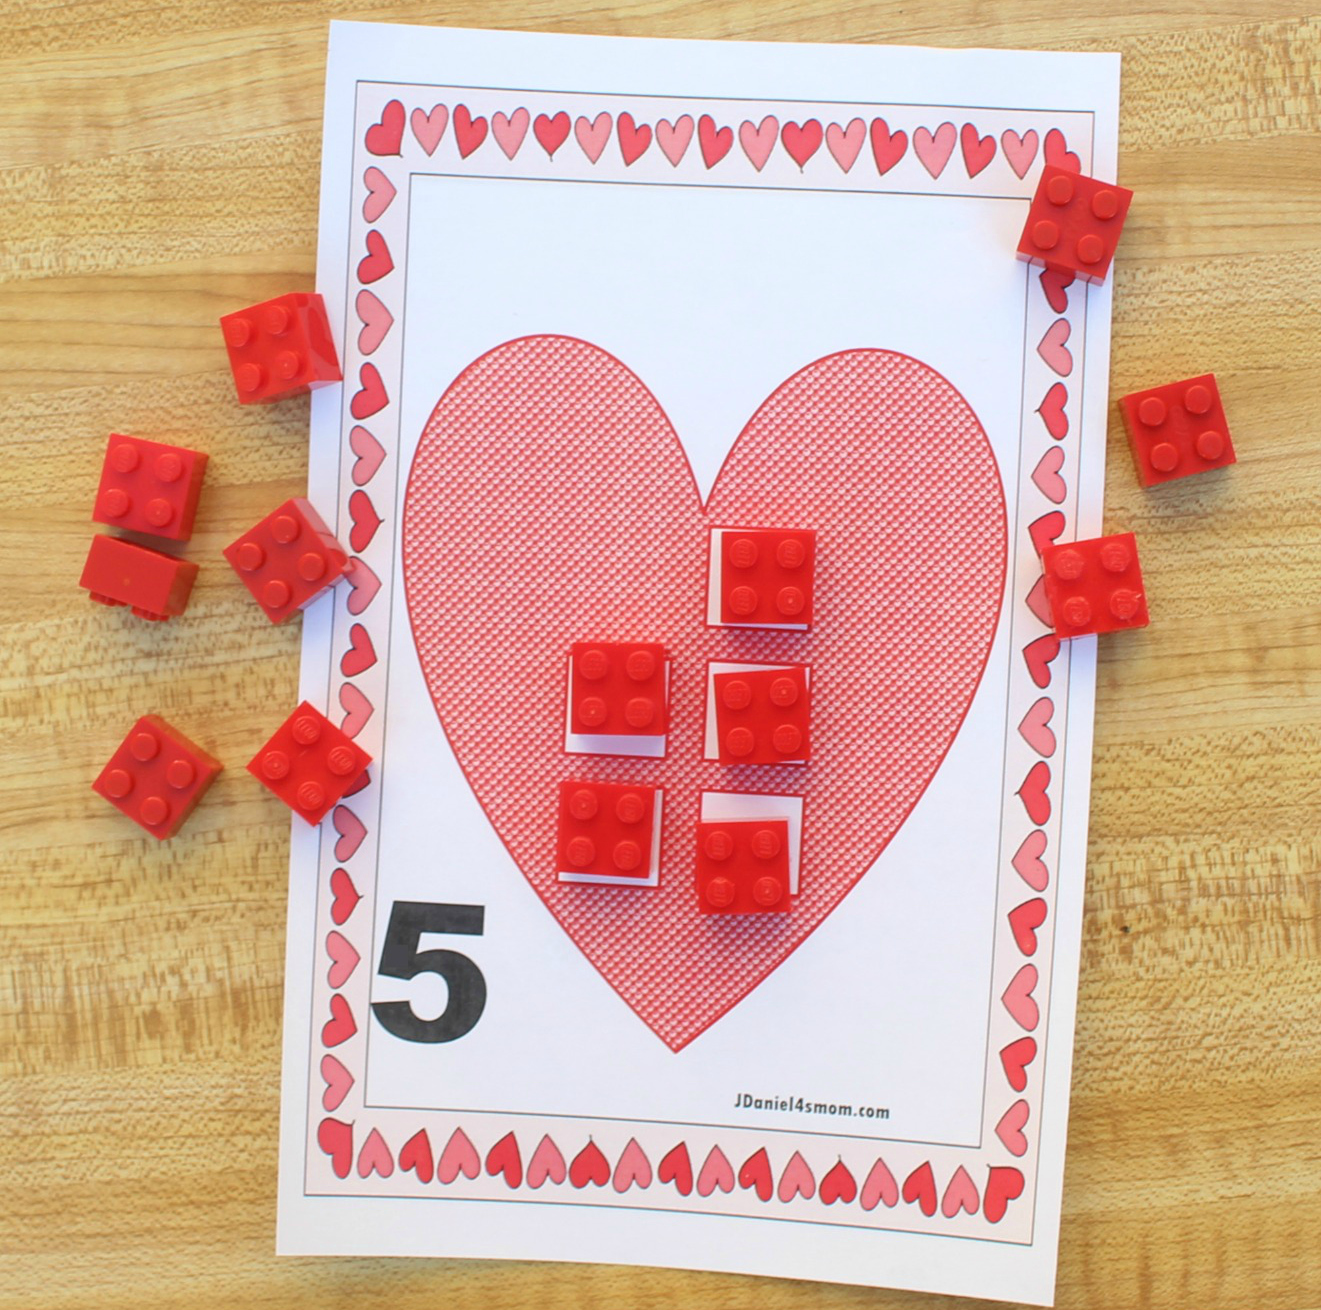 LEGO Math Valentine Counting Activity- Exploring the Number Five